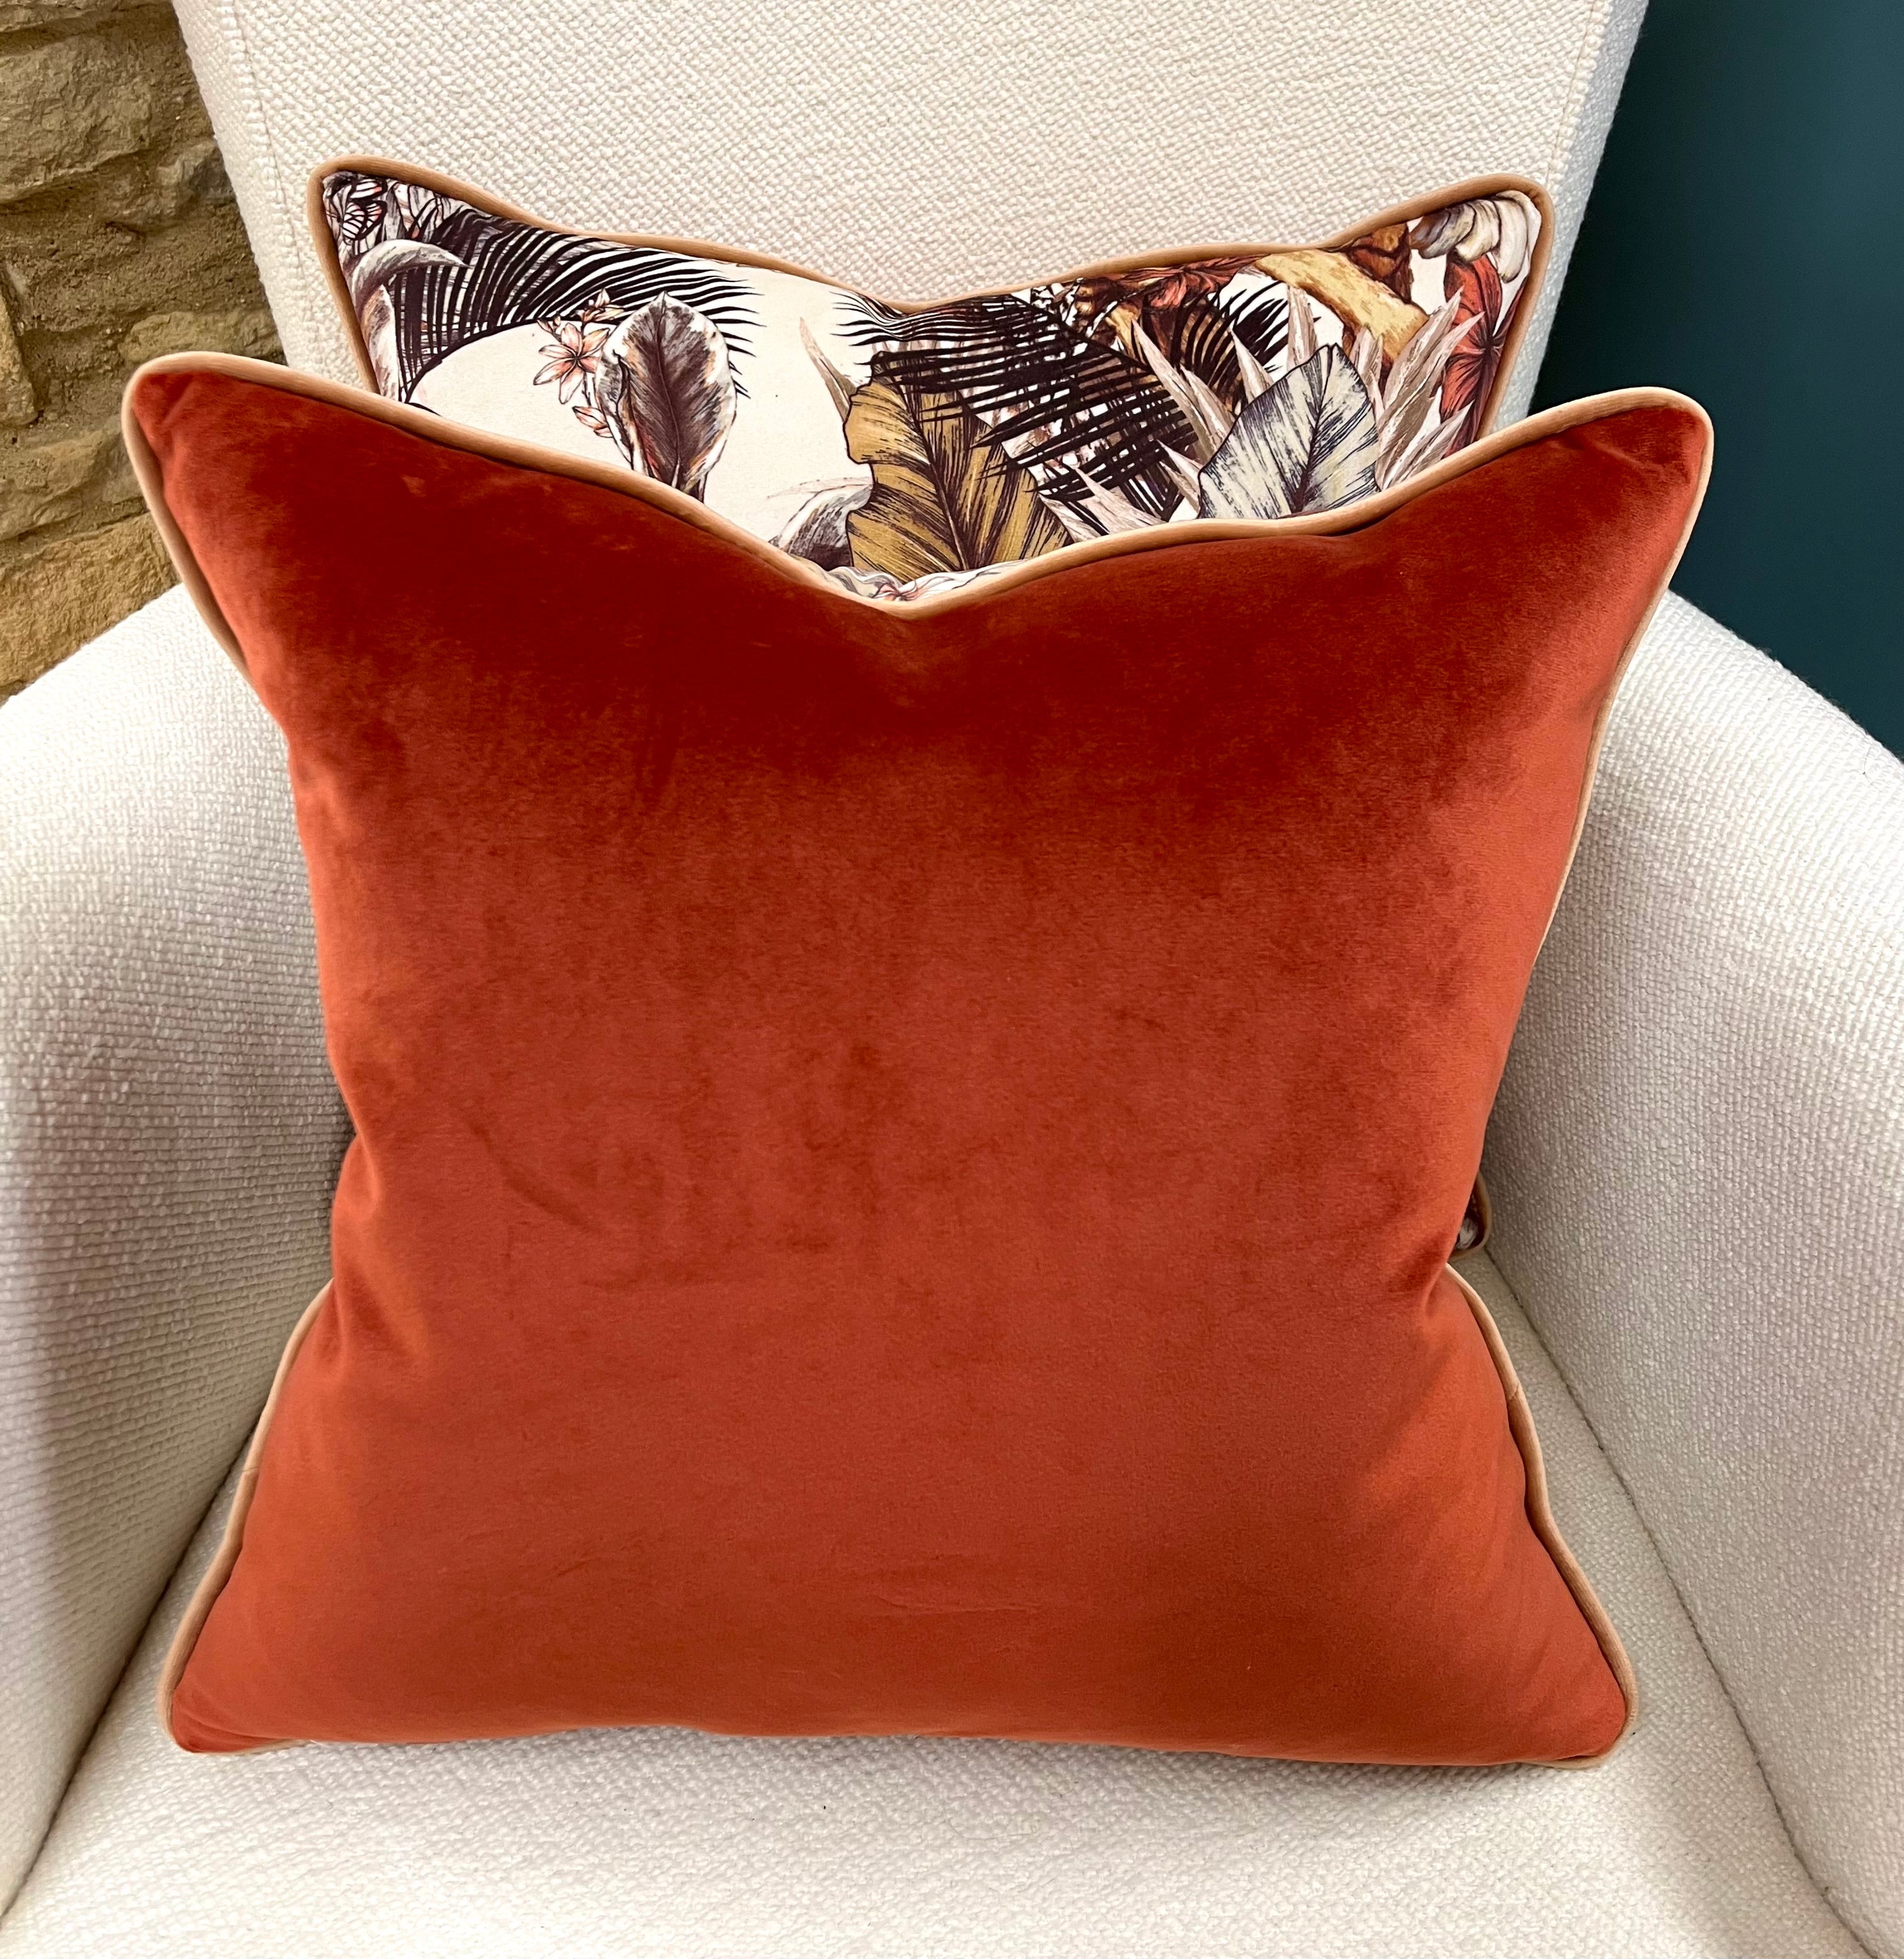 Cushion in PT Bengal Tiger Fabric